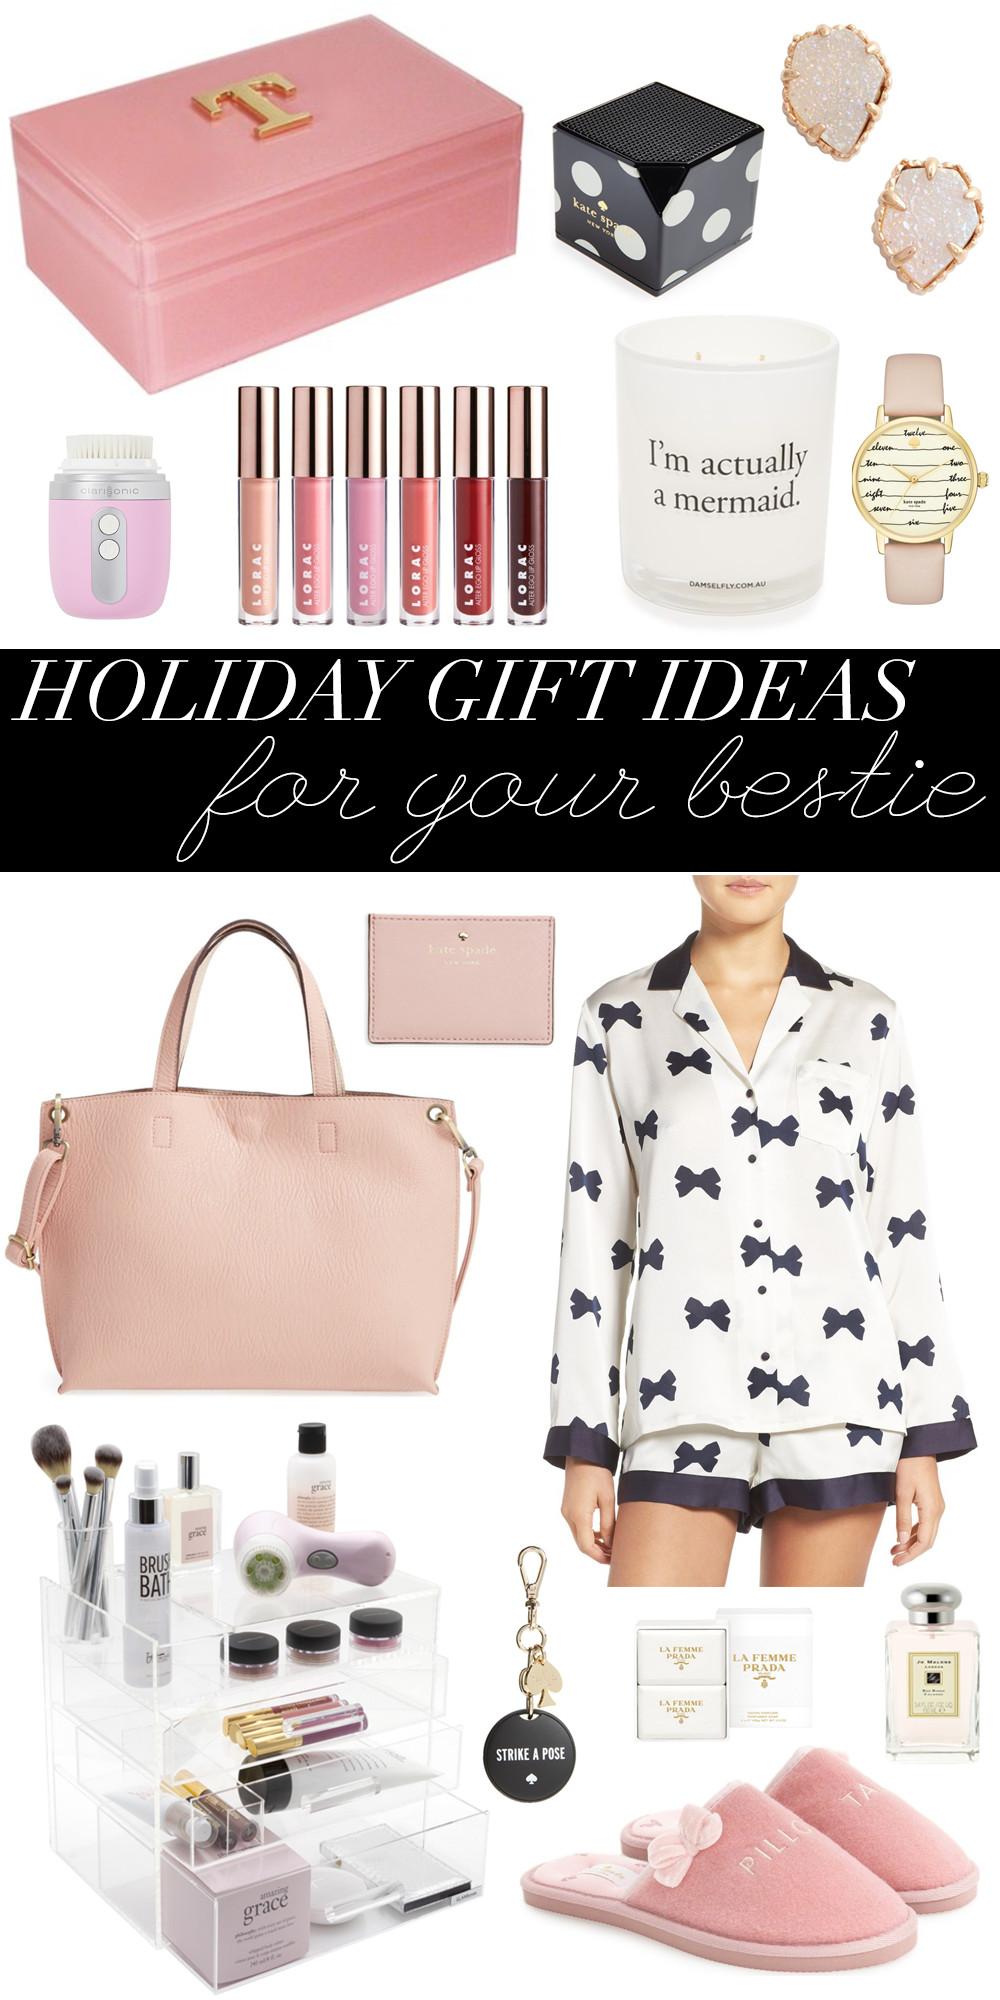 Holiday Gift Ideas For Your Best Friend
 Holiday Gift Ideas For Your Best Friend